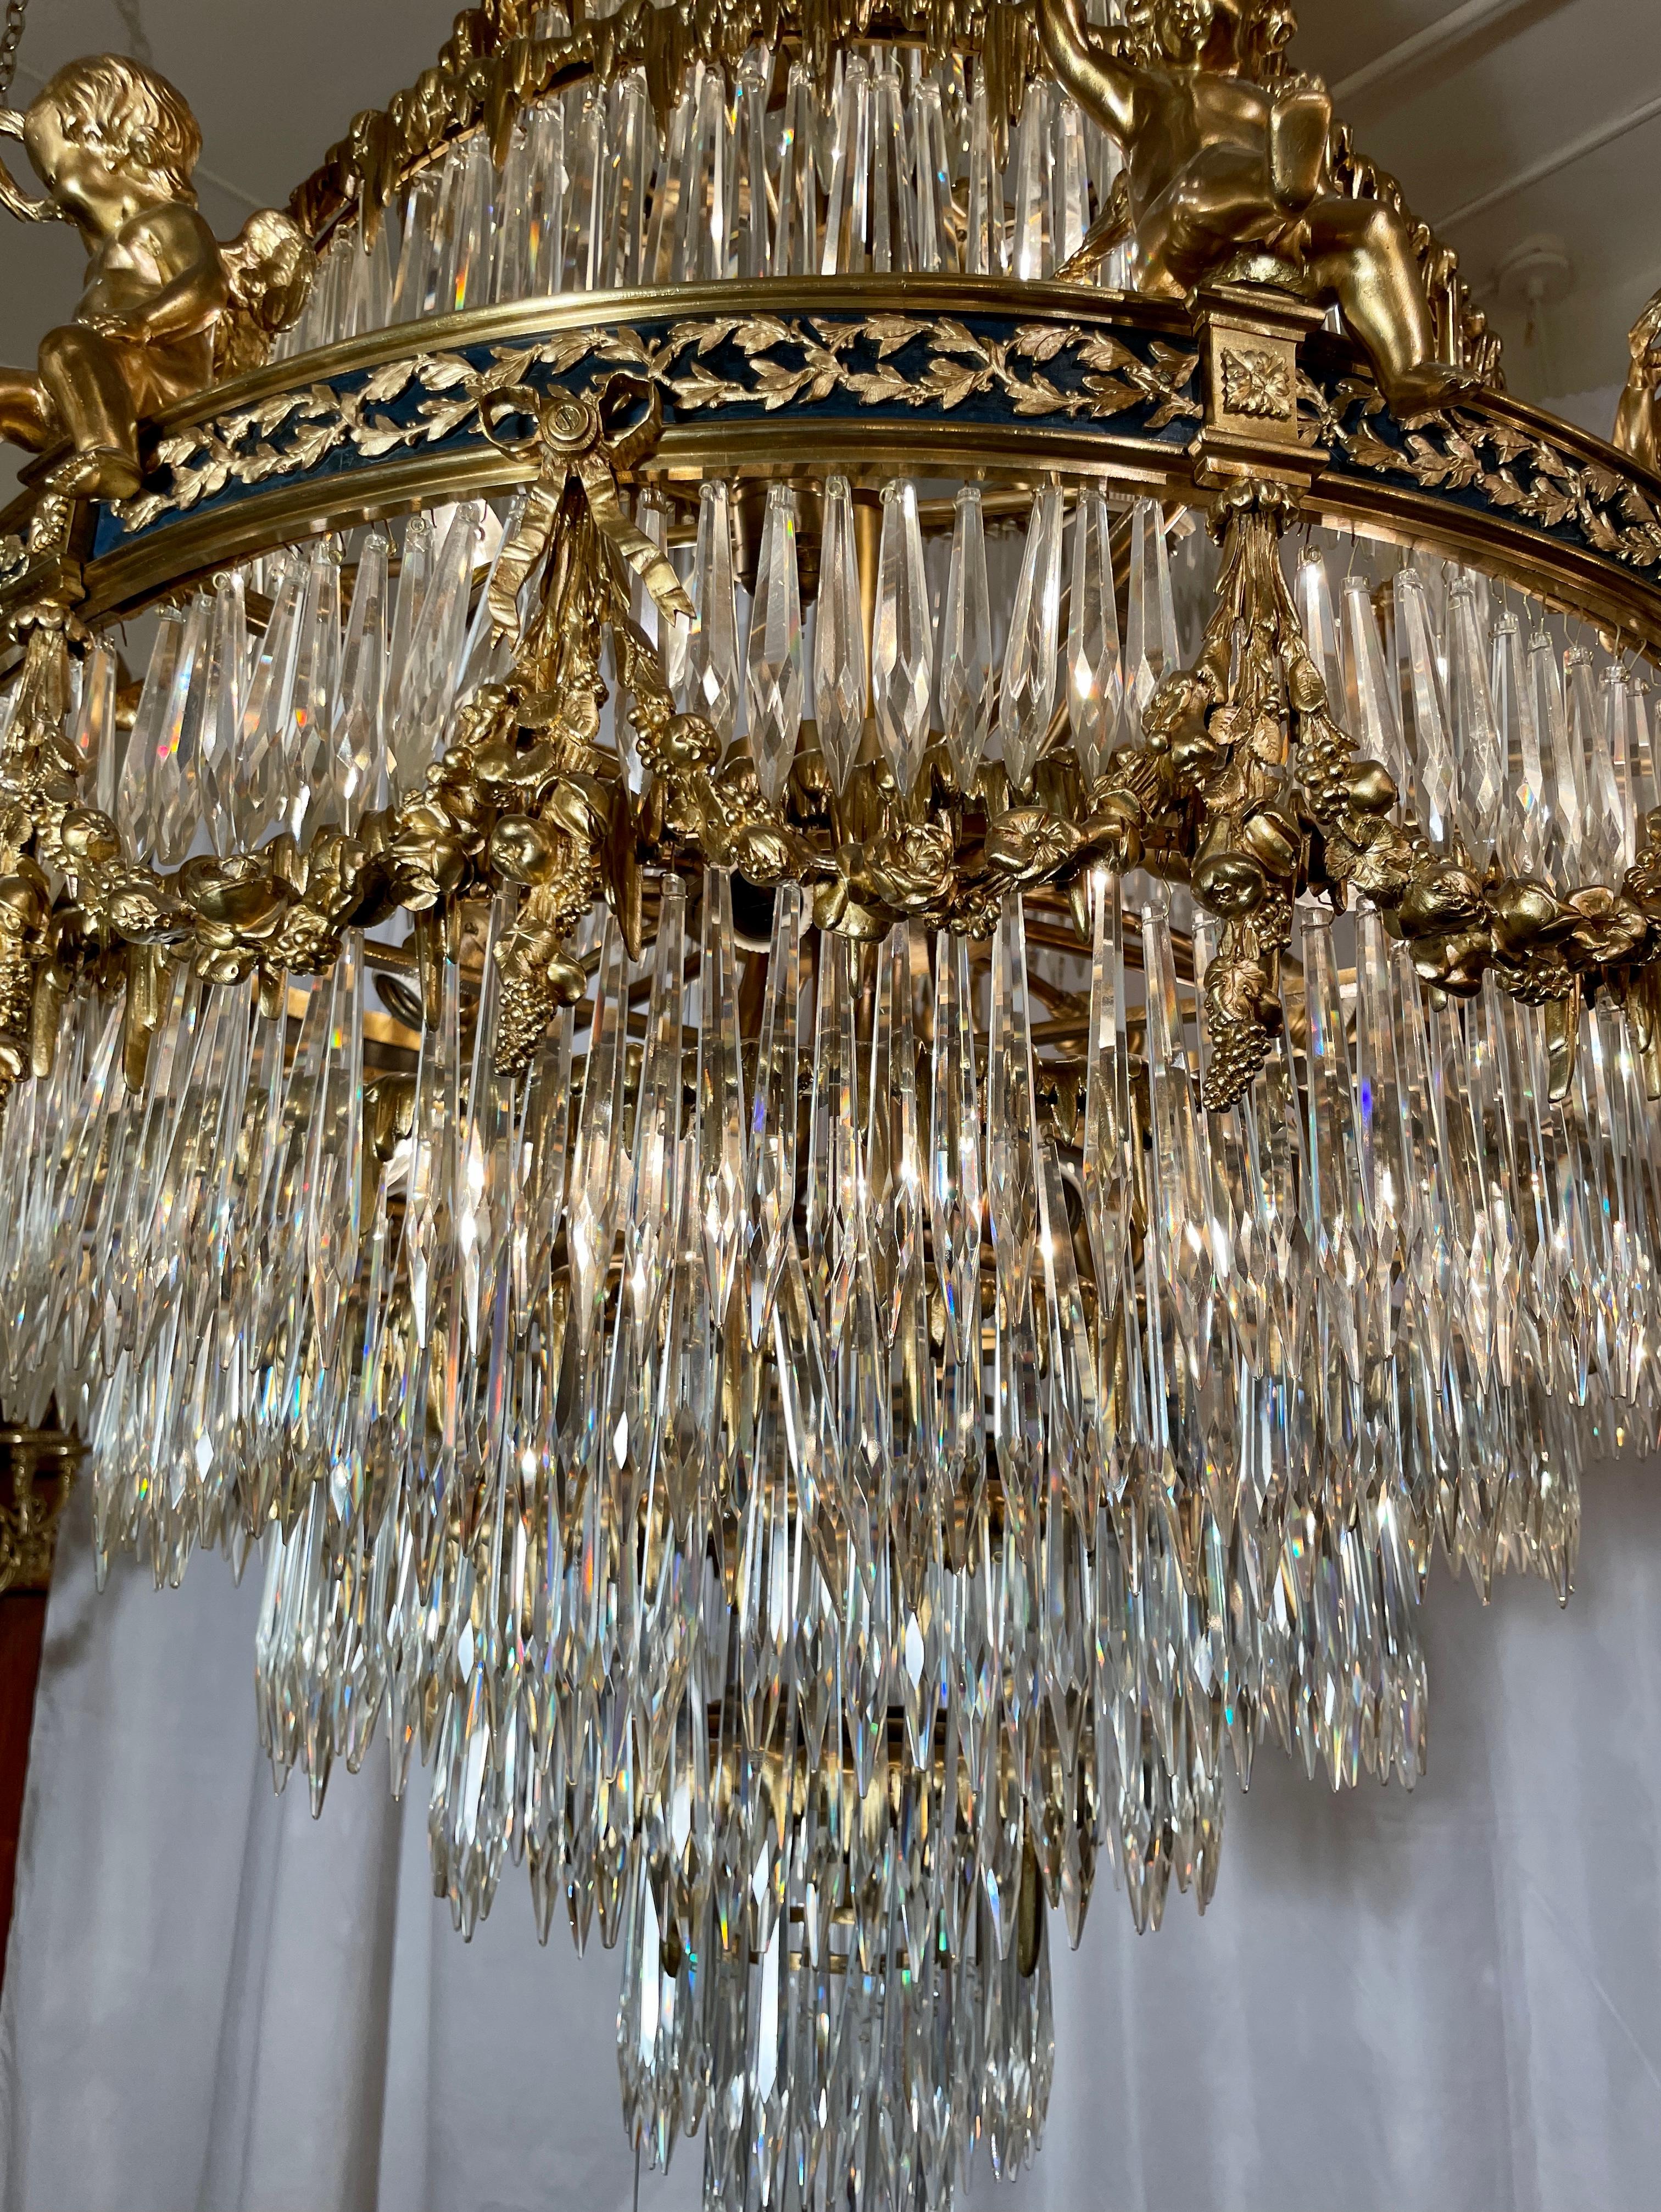 Antique French Baccarat Crystal & Bronze D'Ore Waterfall Chandelier, Circa 1880s For Sale 6